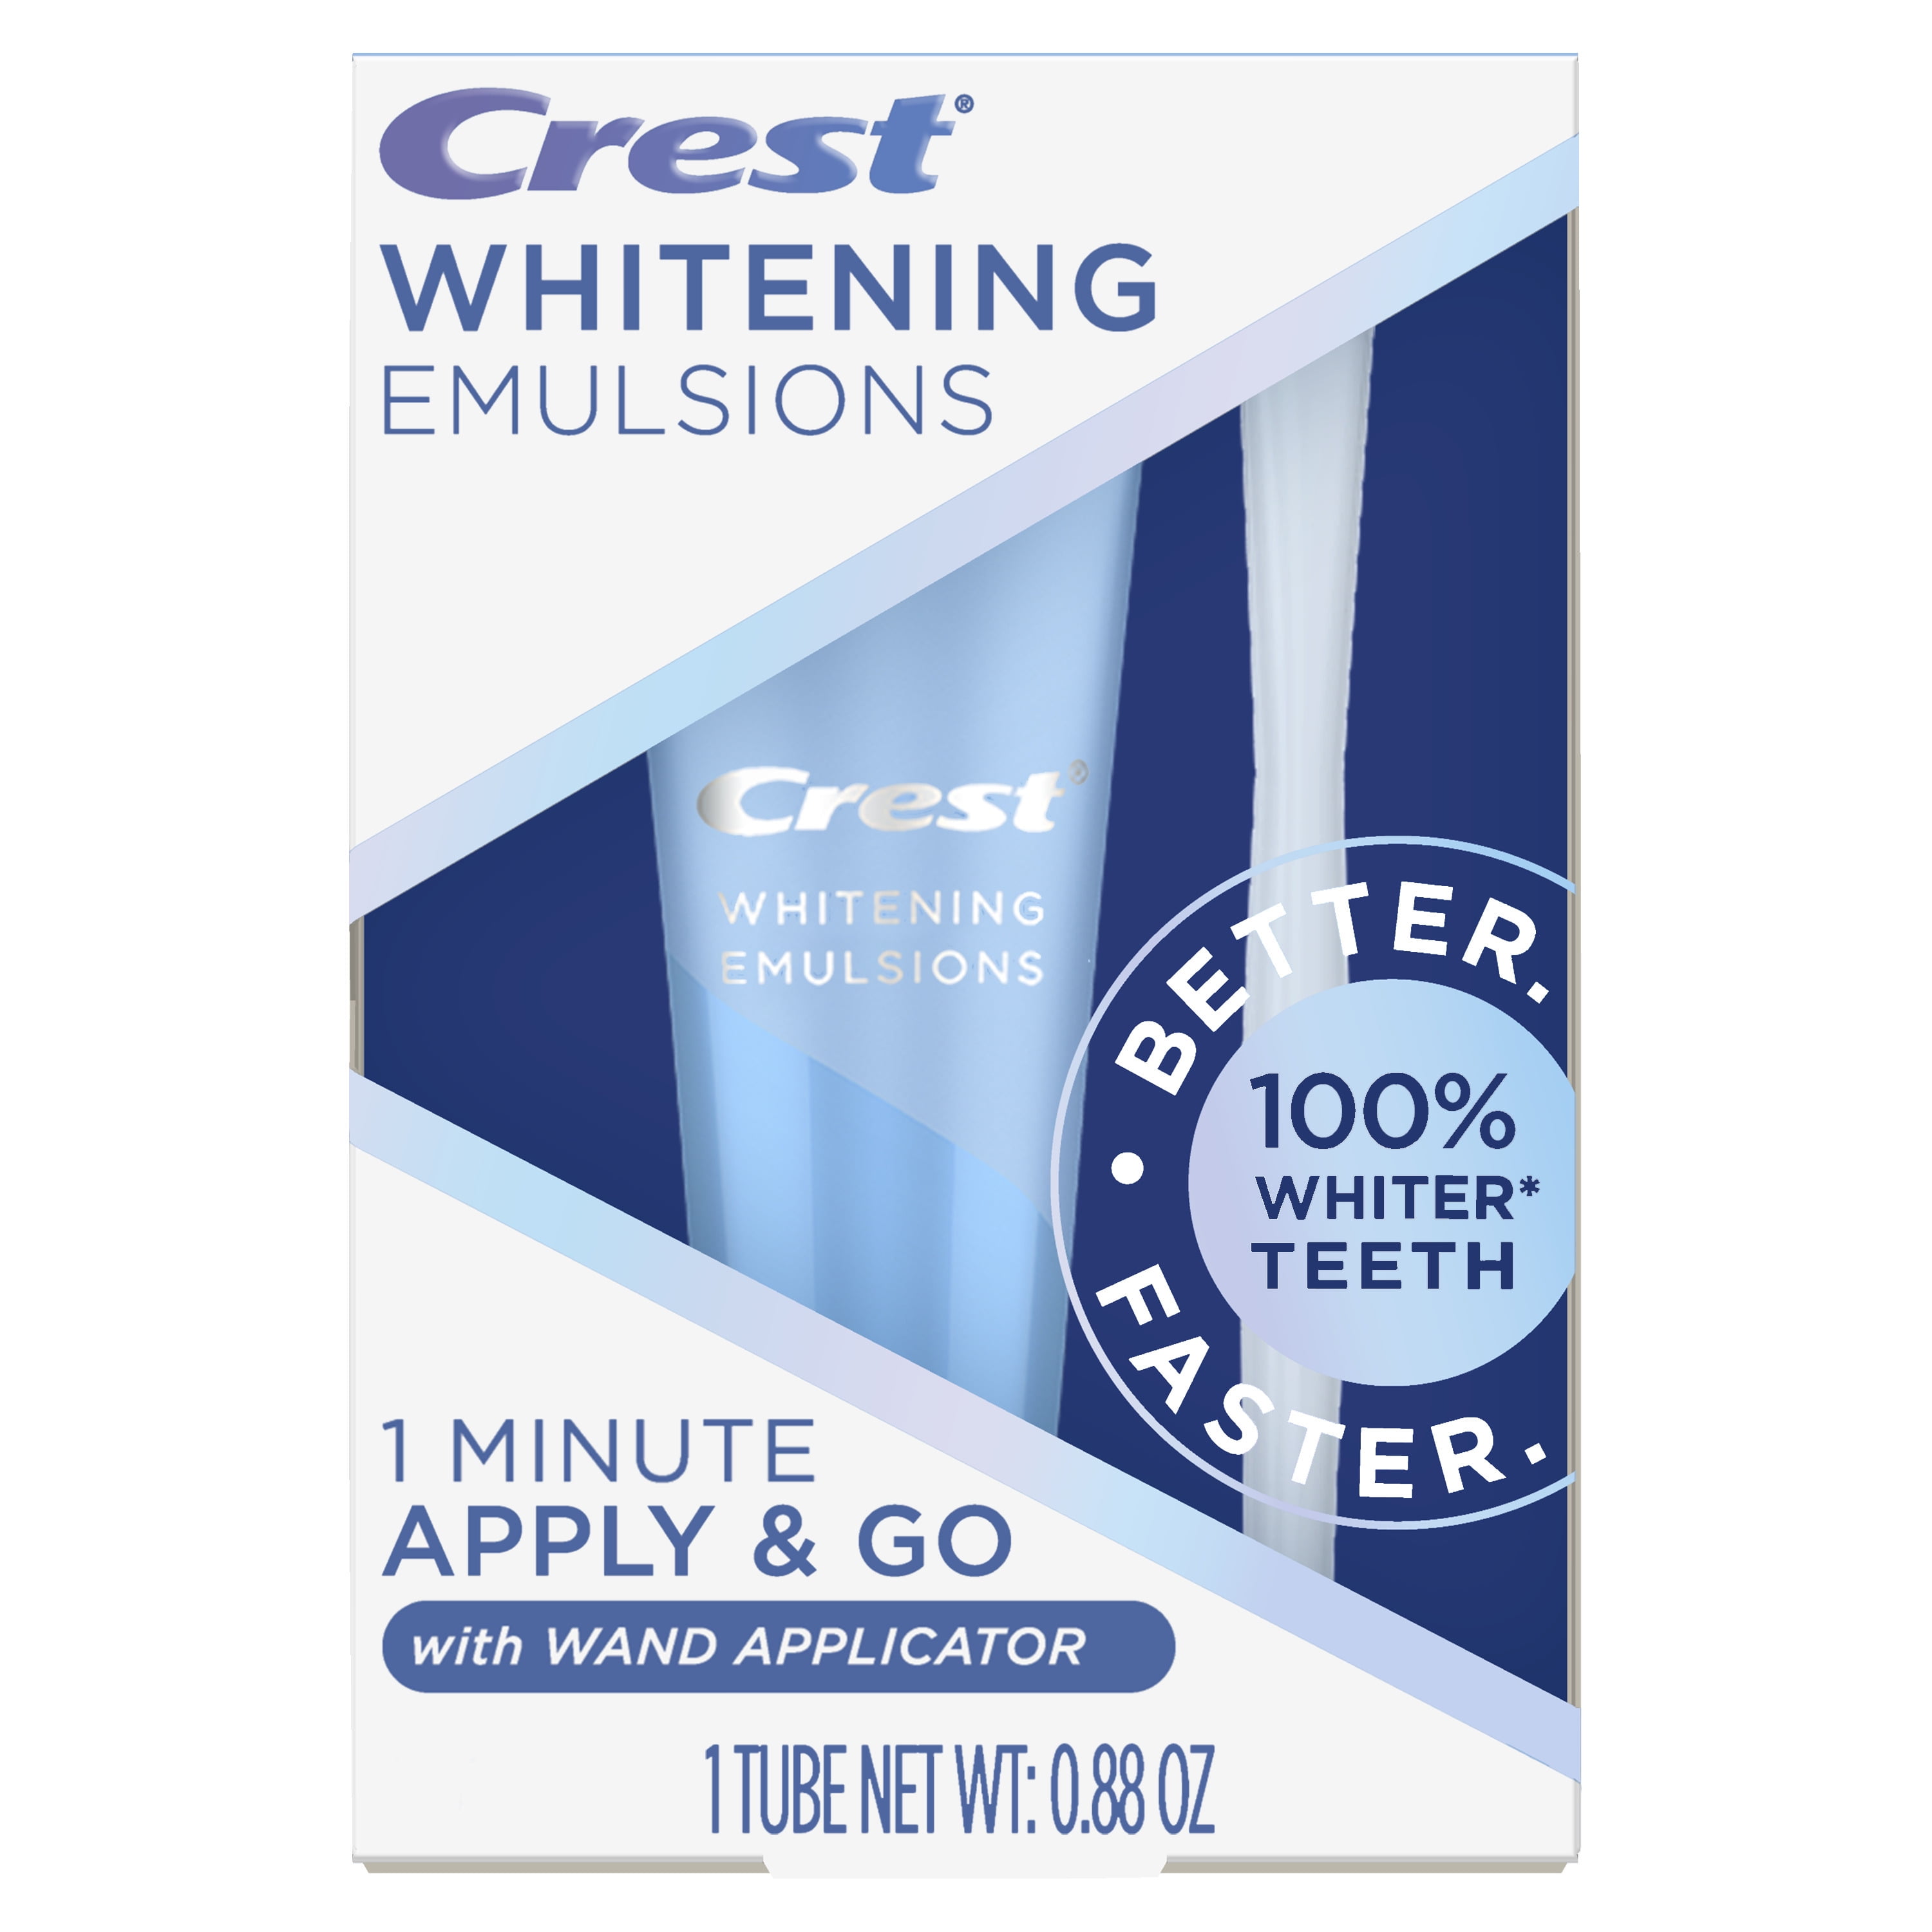 Crest Whitening Emulsions with Wand Applicator, Leave-on Teeth Whitening Treatment